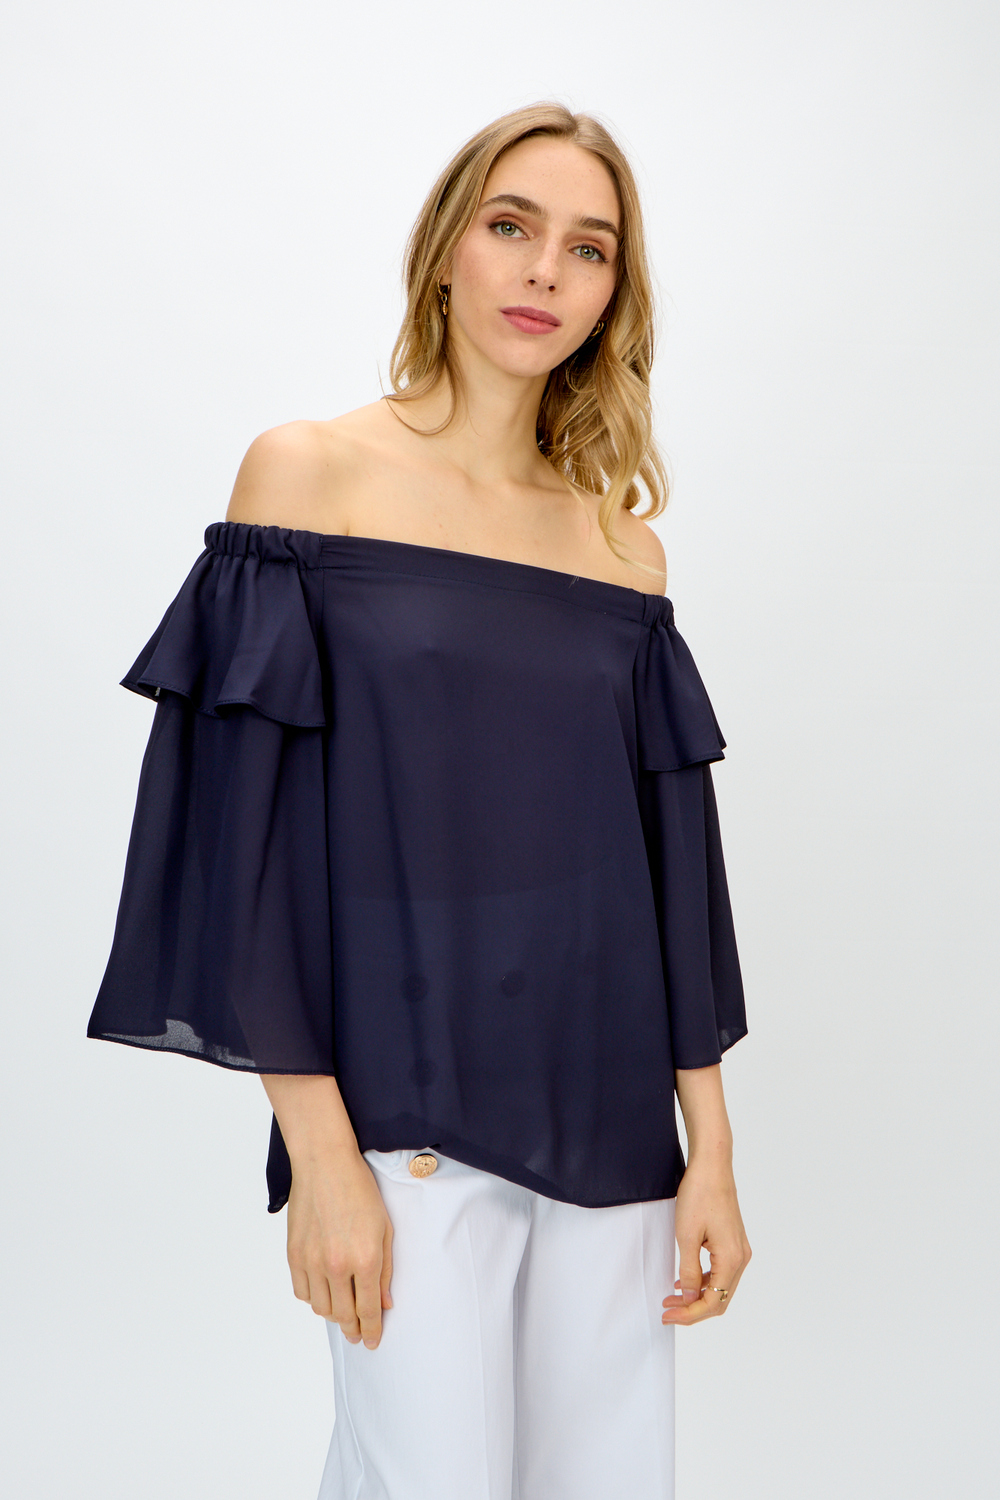 Flounce Sleeve Off-Shoulder Top Style 241305. Midnight Blue